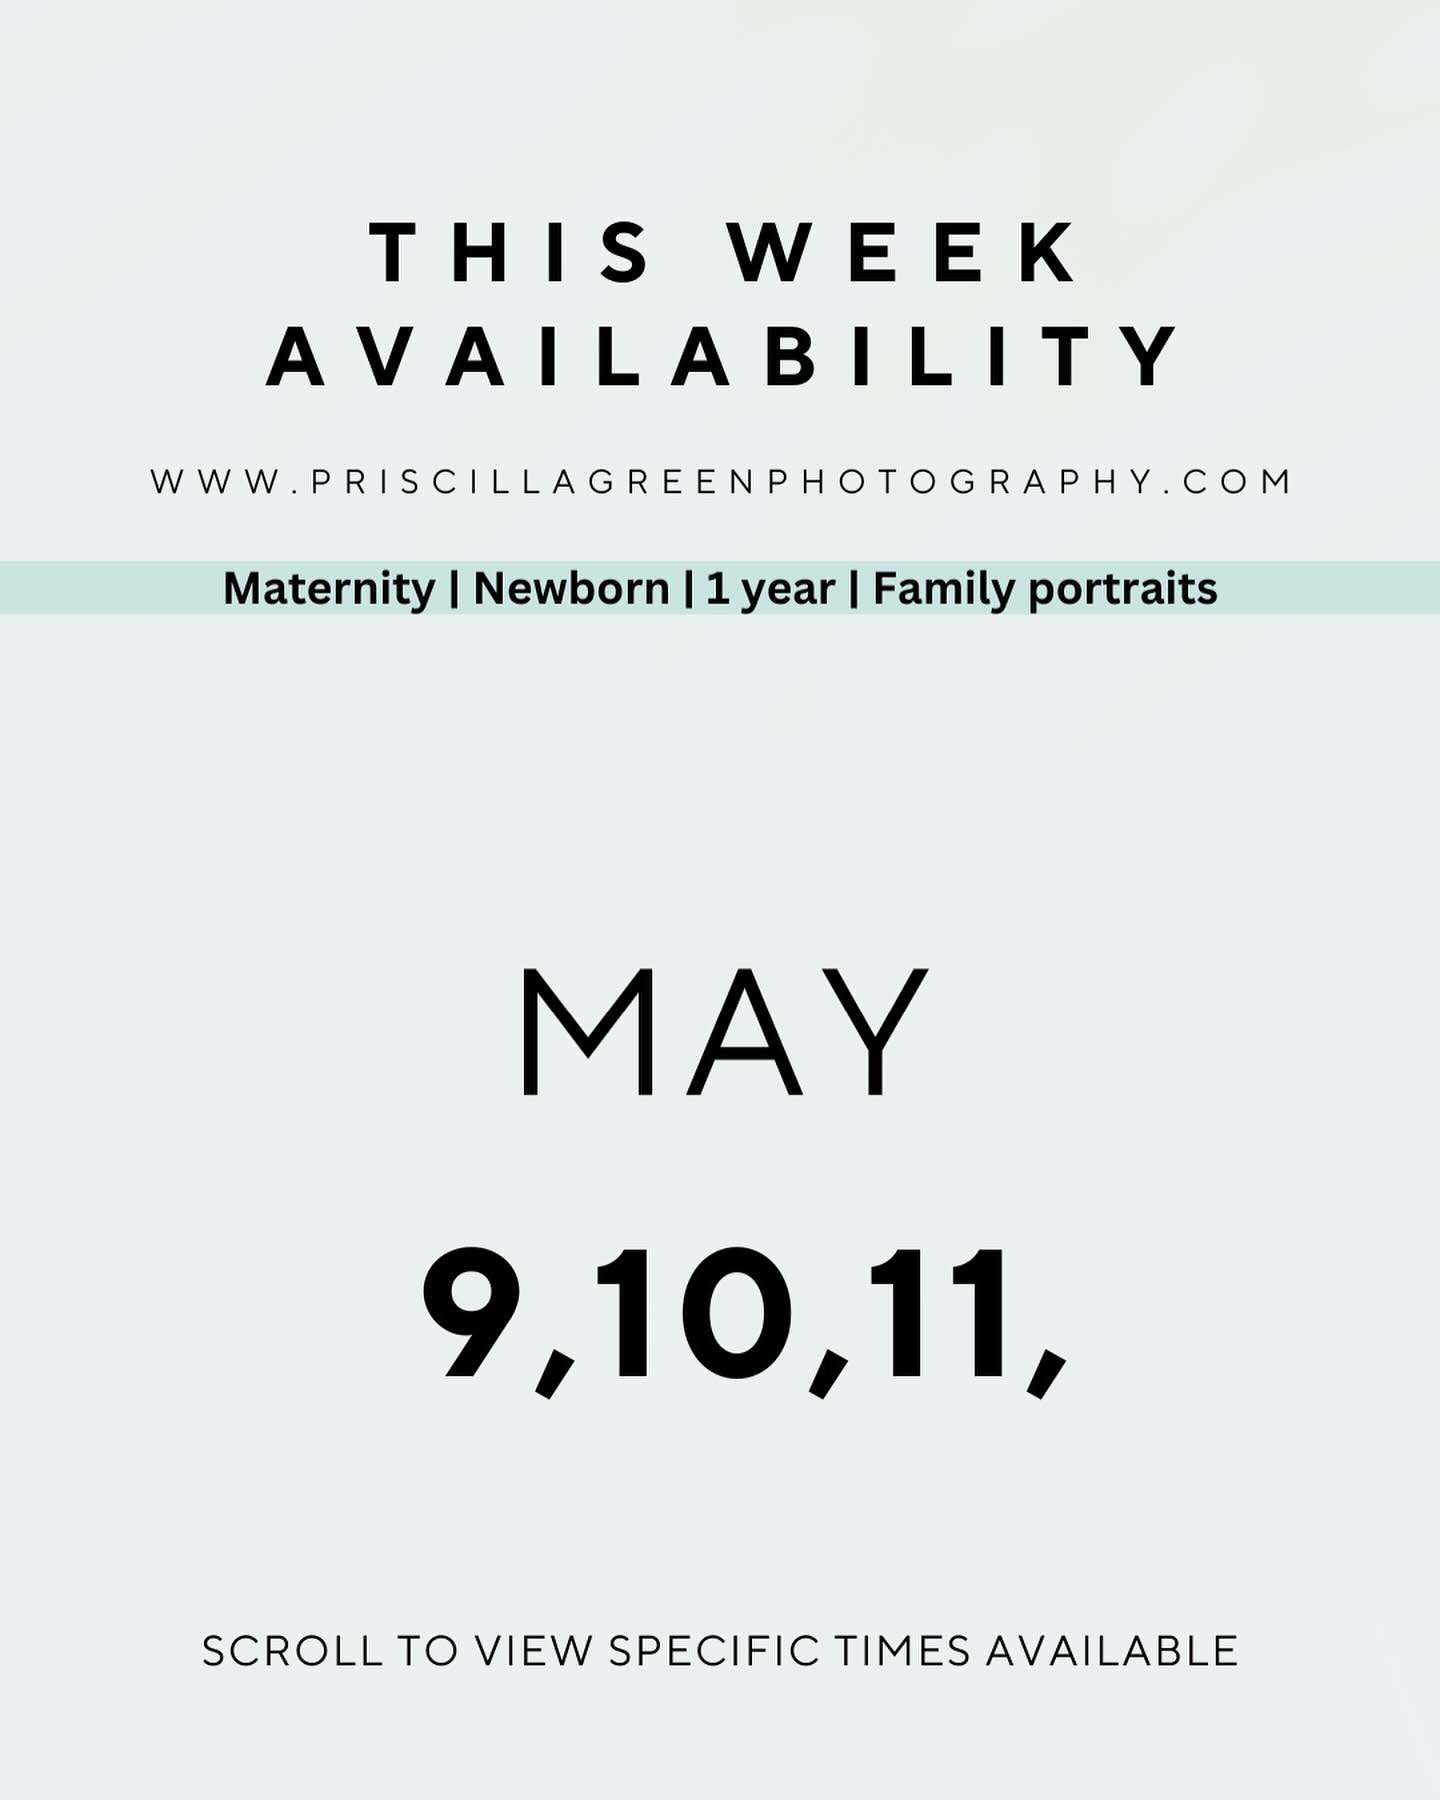 This week&rsquo;s available photoshoots 📸

&ldquo;Today only happens once in a lifetime. Make the most of it.&rdquo;
-Michael Ray

It&rsquo;s so easy to book your photoshoot click the link in bio 🔗 

Charlotte photography studio 12+ years professio